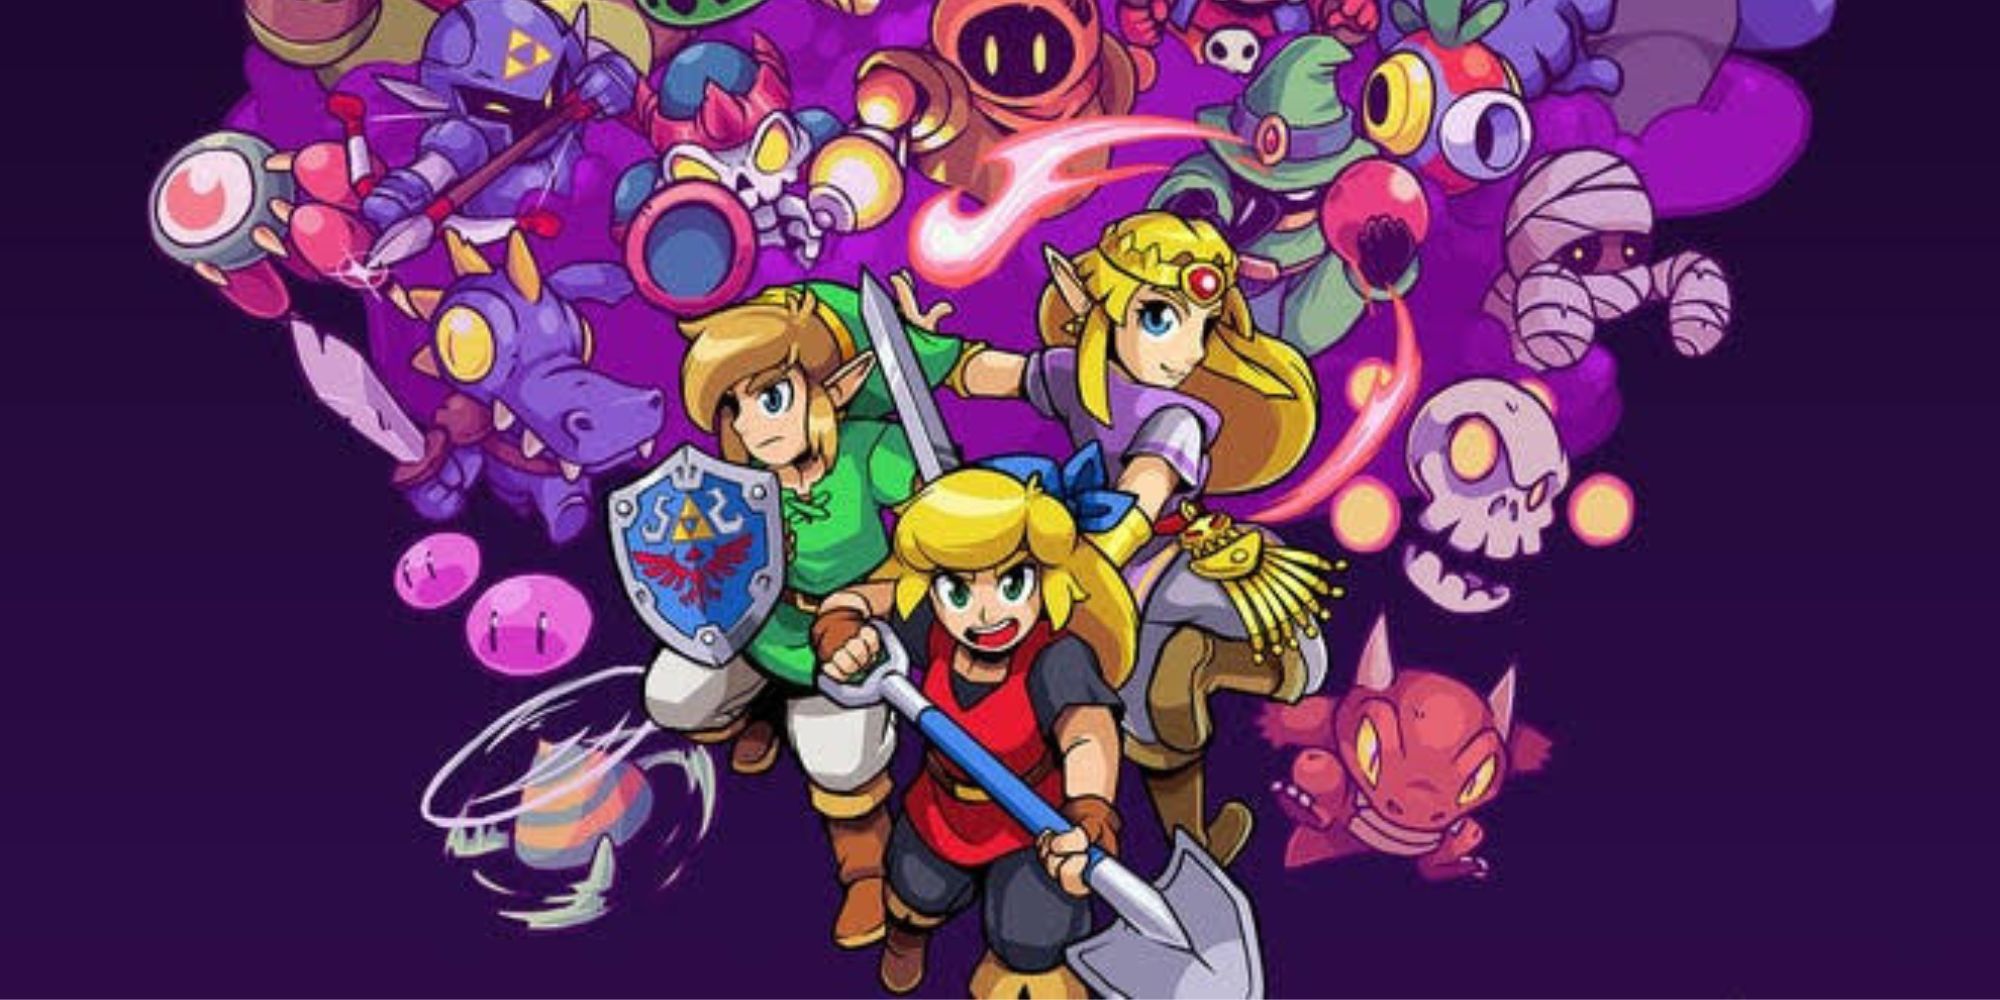 Cadence leads Link and Zelda in front of a group of enemies